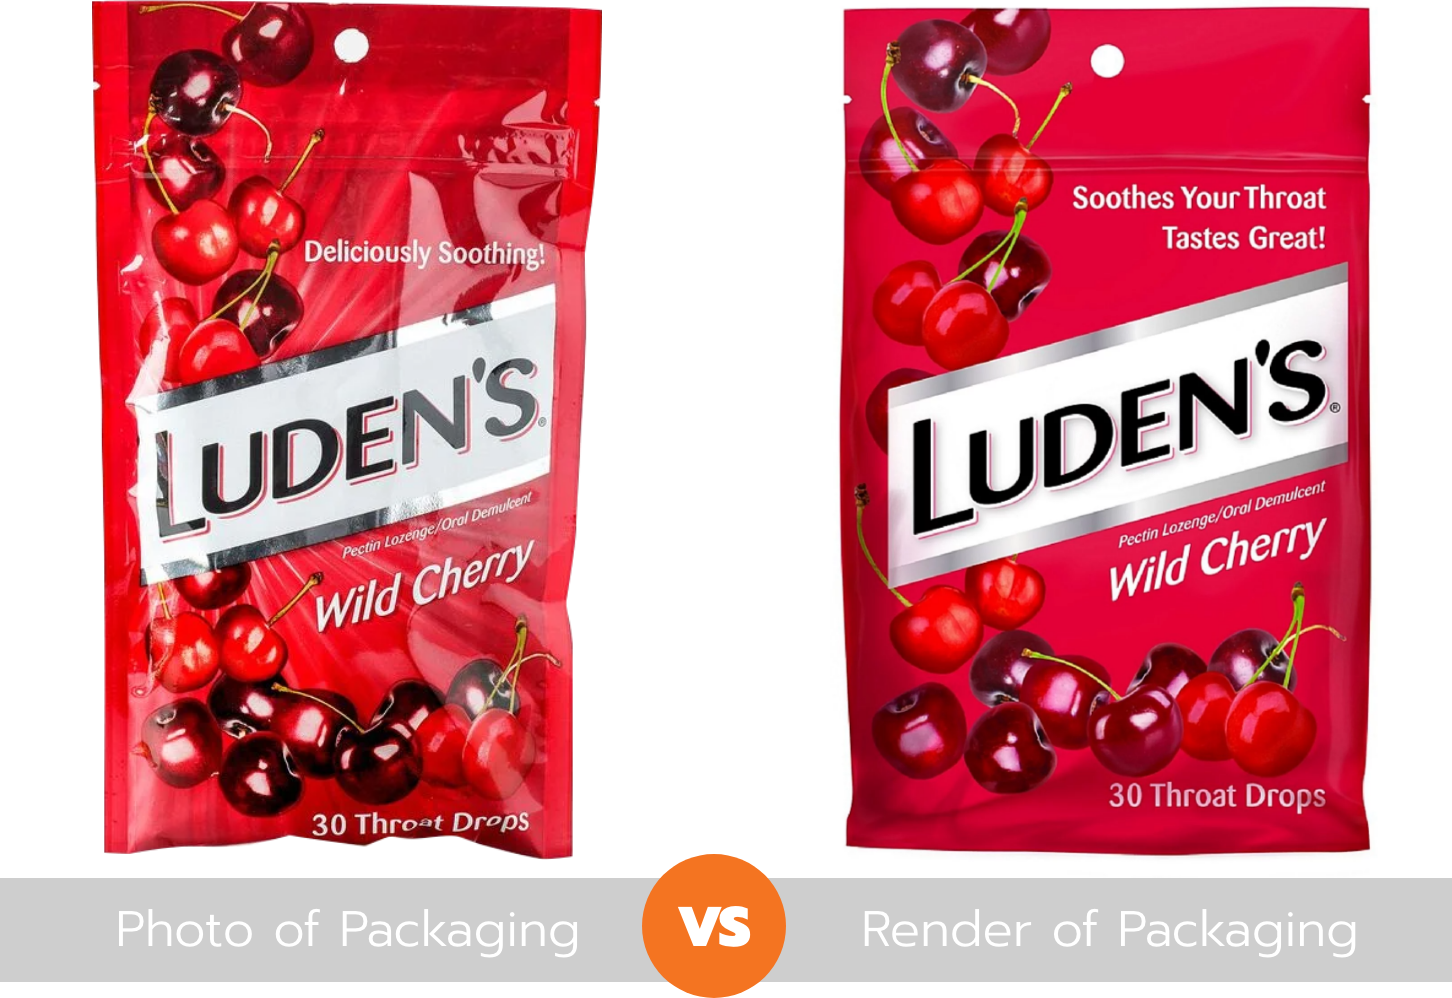 ludens cough drops glossy hard to read package versus a luden rendering